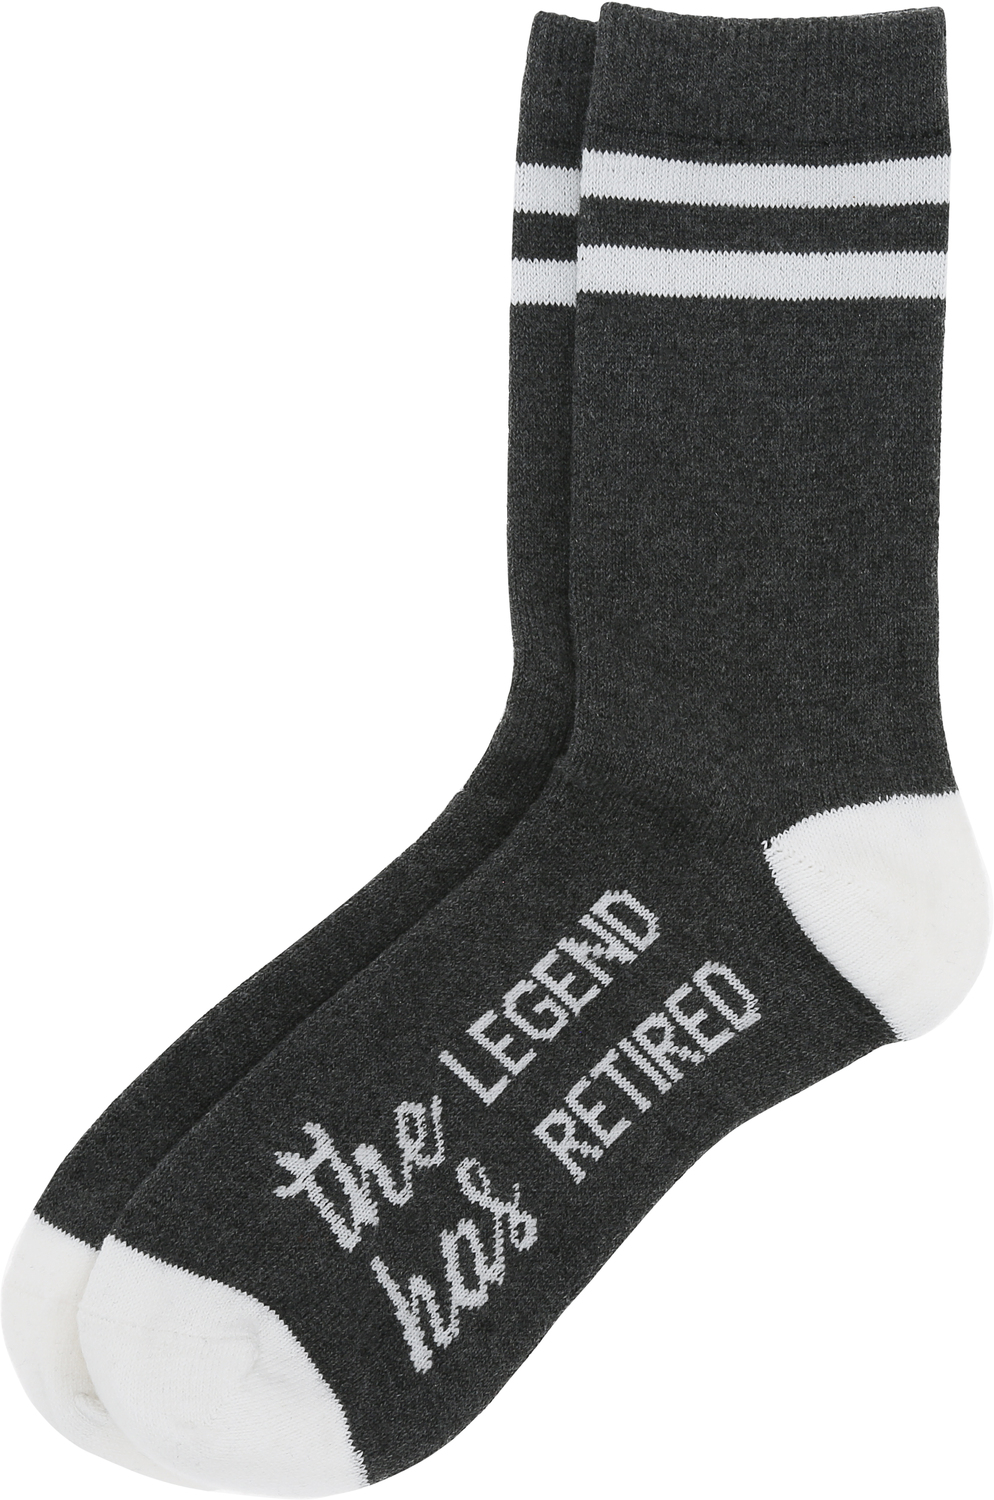 The Legend by Retired Life - The Legend - S/M Crew Socks